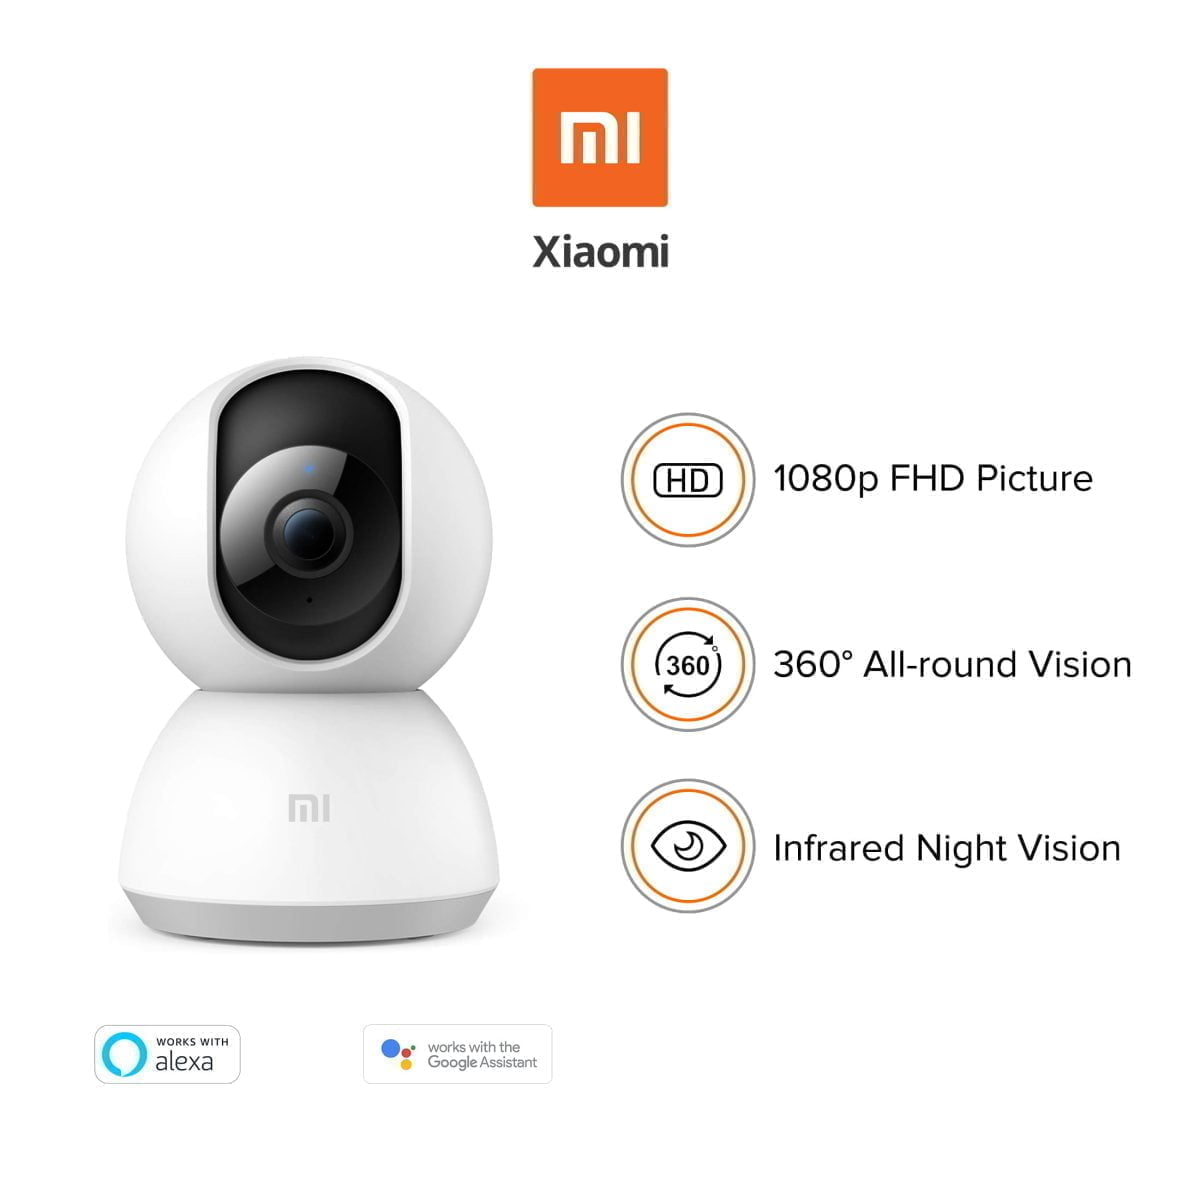 Pms 1578997732.52867814 Xiaomi [Video Width=&Quot;720&Quot; Height=&Quot;404&Quot; Mp4=&Quot;Https://Lablaab.com/Wp-Content/Uploads/2019/11/2160991042151.Mp4&Quot;][/Video] &Lt;Strong&Gt;Xiaomi Xiaobai Gmsxj16A Mijia App Smart Ip Camera 1080P 360° Night Version Home Baby Monitor Ai Humanoid Detection &Lt;/Strong&Gt; &Lt;Strong&Gt;- Remote Viewing Automatic Alarm &Lt;/Strong&Gt; The Mijia App Can Not Only View Real-Time Video Remotely, But Also Make Two-Way Voice Calls. When The Watching Home Mode Is Turned On, The Camera Detects An Abnormal Situation And Automatically Records The Alarm Video And Pushes It To The Mobile Phone. &Lt;Strong&Gt;- Ai Humanoid Detection&Lt;/Strong&Gt; &Lt;Div&Gt;After The Mijia App Has Turned On The Housekeeping Mode, The Camera Detects An Abnormal Situation, Automatically Records The Alarm Video, And Pushes The Message To The Phone. Combined With Ai Technology, The Algorithm Is Optimized For The Target, Effectively Reducing The Invalid Alarm And Making The Alarm More Accurate.&Lt;/Div&Gt; &Lt;Div&Gt;&Lt;Strong&Gt;- Hd Panoramic Night Vision Enhancement&Lt;/Strong&Gt;&Lt;/Div&Gt; &Lt;Div&Gt;With Dual-Motor Drive, The Control Unit 360° Horizontal Rotation Adjusts The Angle Of View, High-Definition Picture Quality Allows The Picture To Retain More Details, Noise Reduction Infrared Night Vision, Even At Night, Can Present A Clear Picture&Lt;/Div&Gt; &Lt;Div&Gt;&Lt;Strong&Gt;- Watch Smooth And Save Space&Lt;/Strong&Gt;&Lt;/Div&Gt; &Lt;Div&Gt;Adopting H.265 Video Coding Technology, The Viewing Is Smoother Under The Same Network Conditions, And The Video Takes Up Less Space.&Lt;/Div&Gt; &Lt;Div&Gt; &Lt;Strong&Gt;- Smart Linkage, Security Upgrade &Lt;/Strong&Gt; &Lt;Div&Gt; With Mijia App, You Can Mix With Other Mijia Smart Products, You Can Customize Your Own Personalized Scene To Better Protect The Privacy Of Individuals And Family. &Lt;Strong&Gt;- Support Multi-Person Terminal Remote Viewing &Lt;/Strong&Gt; Support Mobile Phone/Tablet Remote Viewing, And Share Real-Time Pictures To Family And Friends At The Same Time. For Historical Video Recording Stored In Micro Sd Card, Support 1X/4X/6X Double-Speed Playback, Which Can Be Quickly Searched, Saving Time And Effort &Lt;/Div&Gt; &Lt;/Div&Gt; Mi Home Security Camera 1080P Global (360 Deg) With Night Vision, Supports (Alexa And Google Assistant)